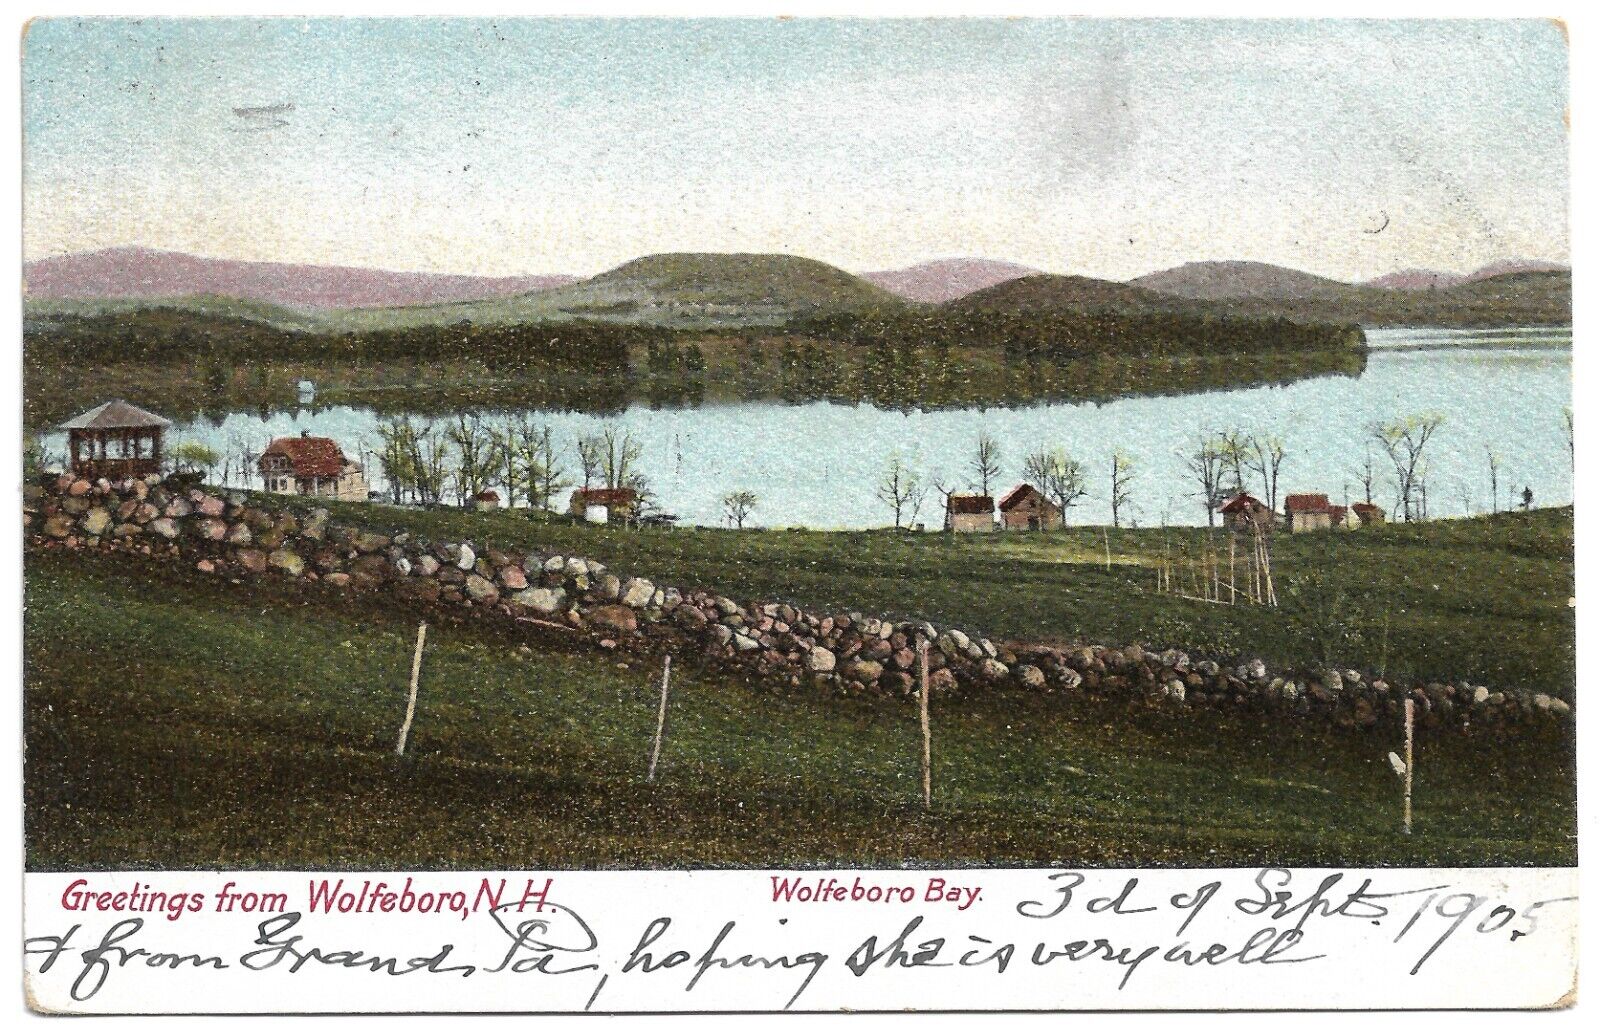 Wolfeboro Bay New Hampshire NH Greetings From Wolfboro 1905 Vintage Postcard